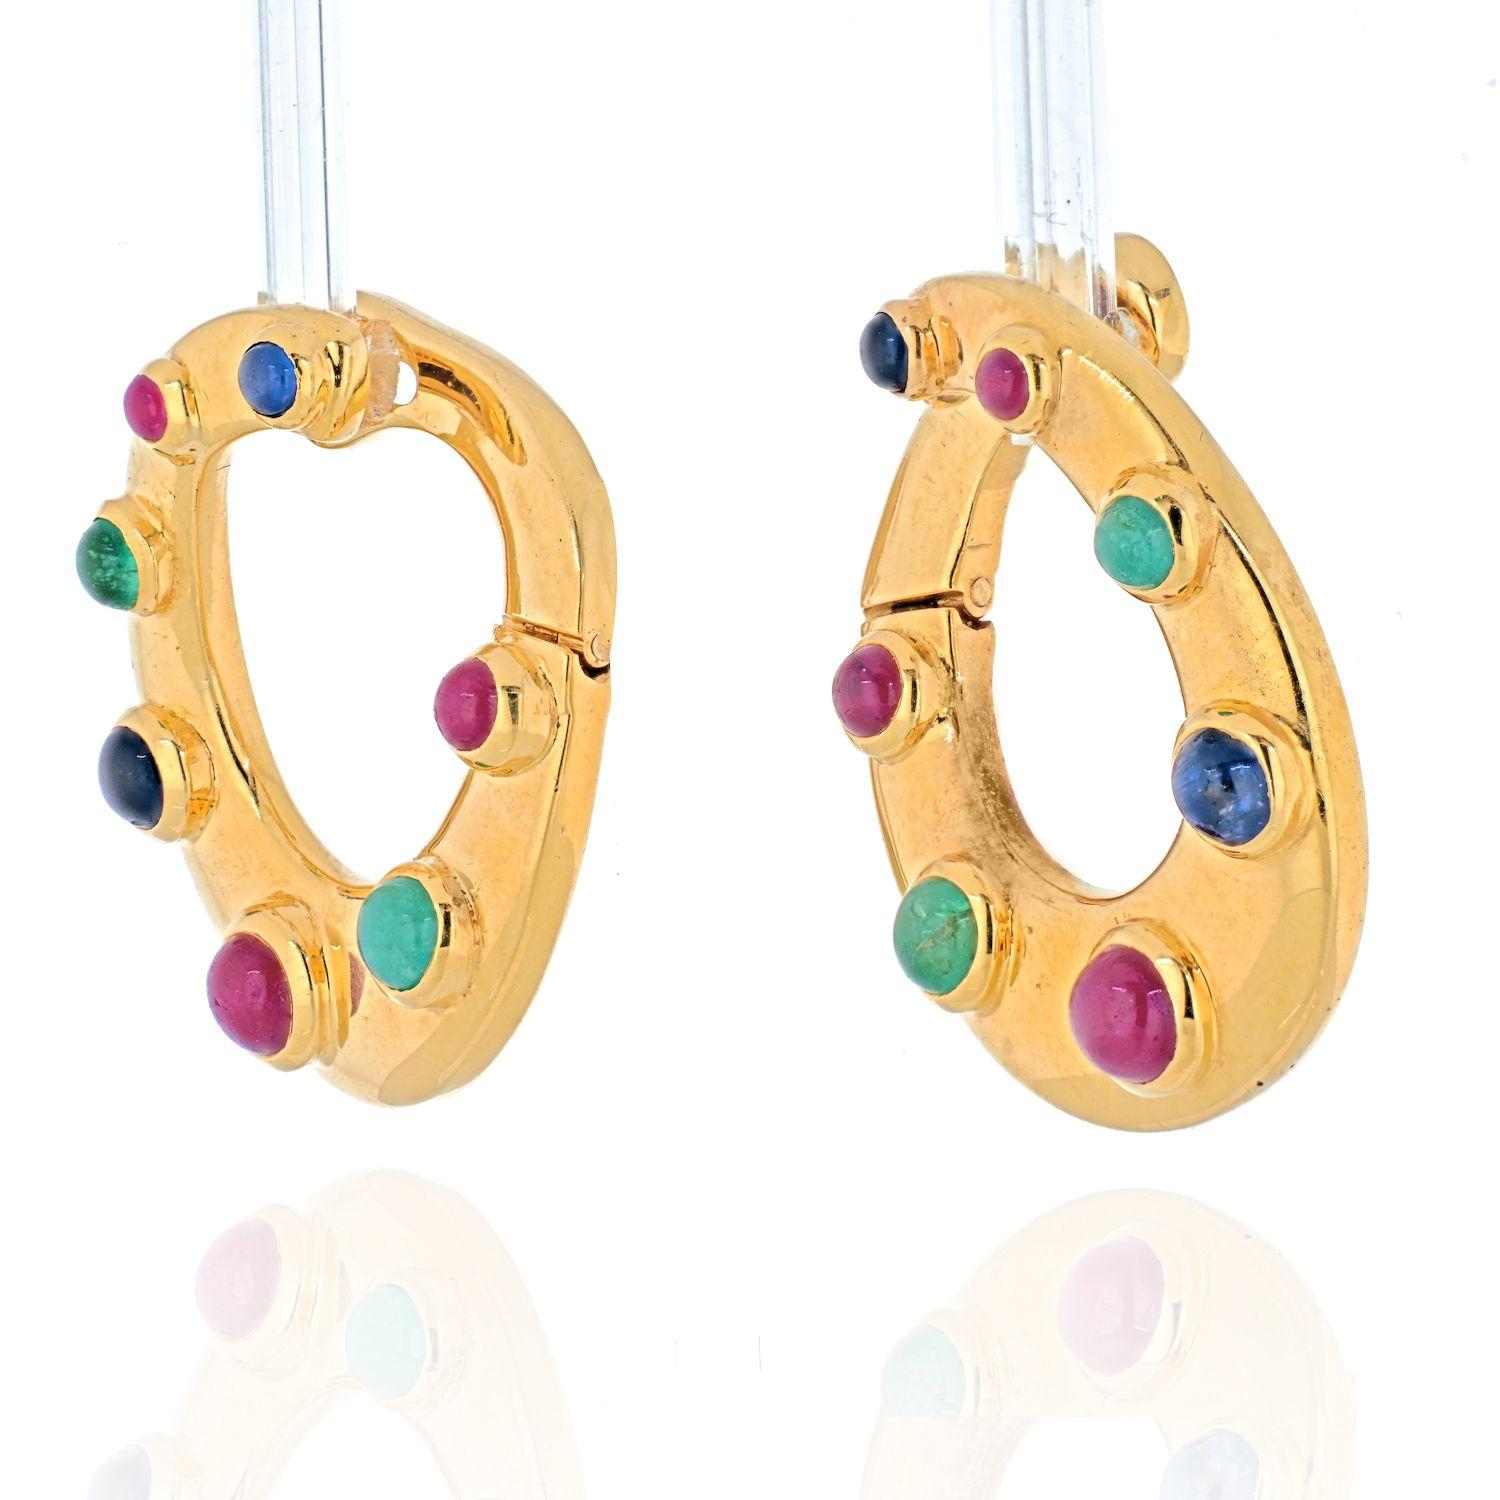 A pair of David Webb 18K Yellow Gold Oval Shaped Sapphires, Emeralds and Rubies Earrings.
This is an exciting pair of earrings with the gold that was finished sonewhat flat, therefore making these earrings nice and light. Mounted with bright colored